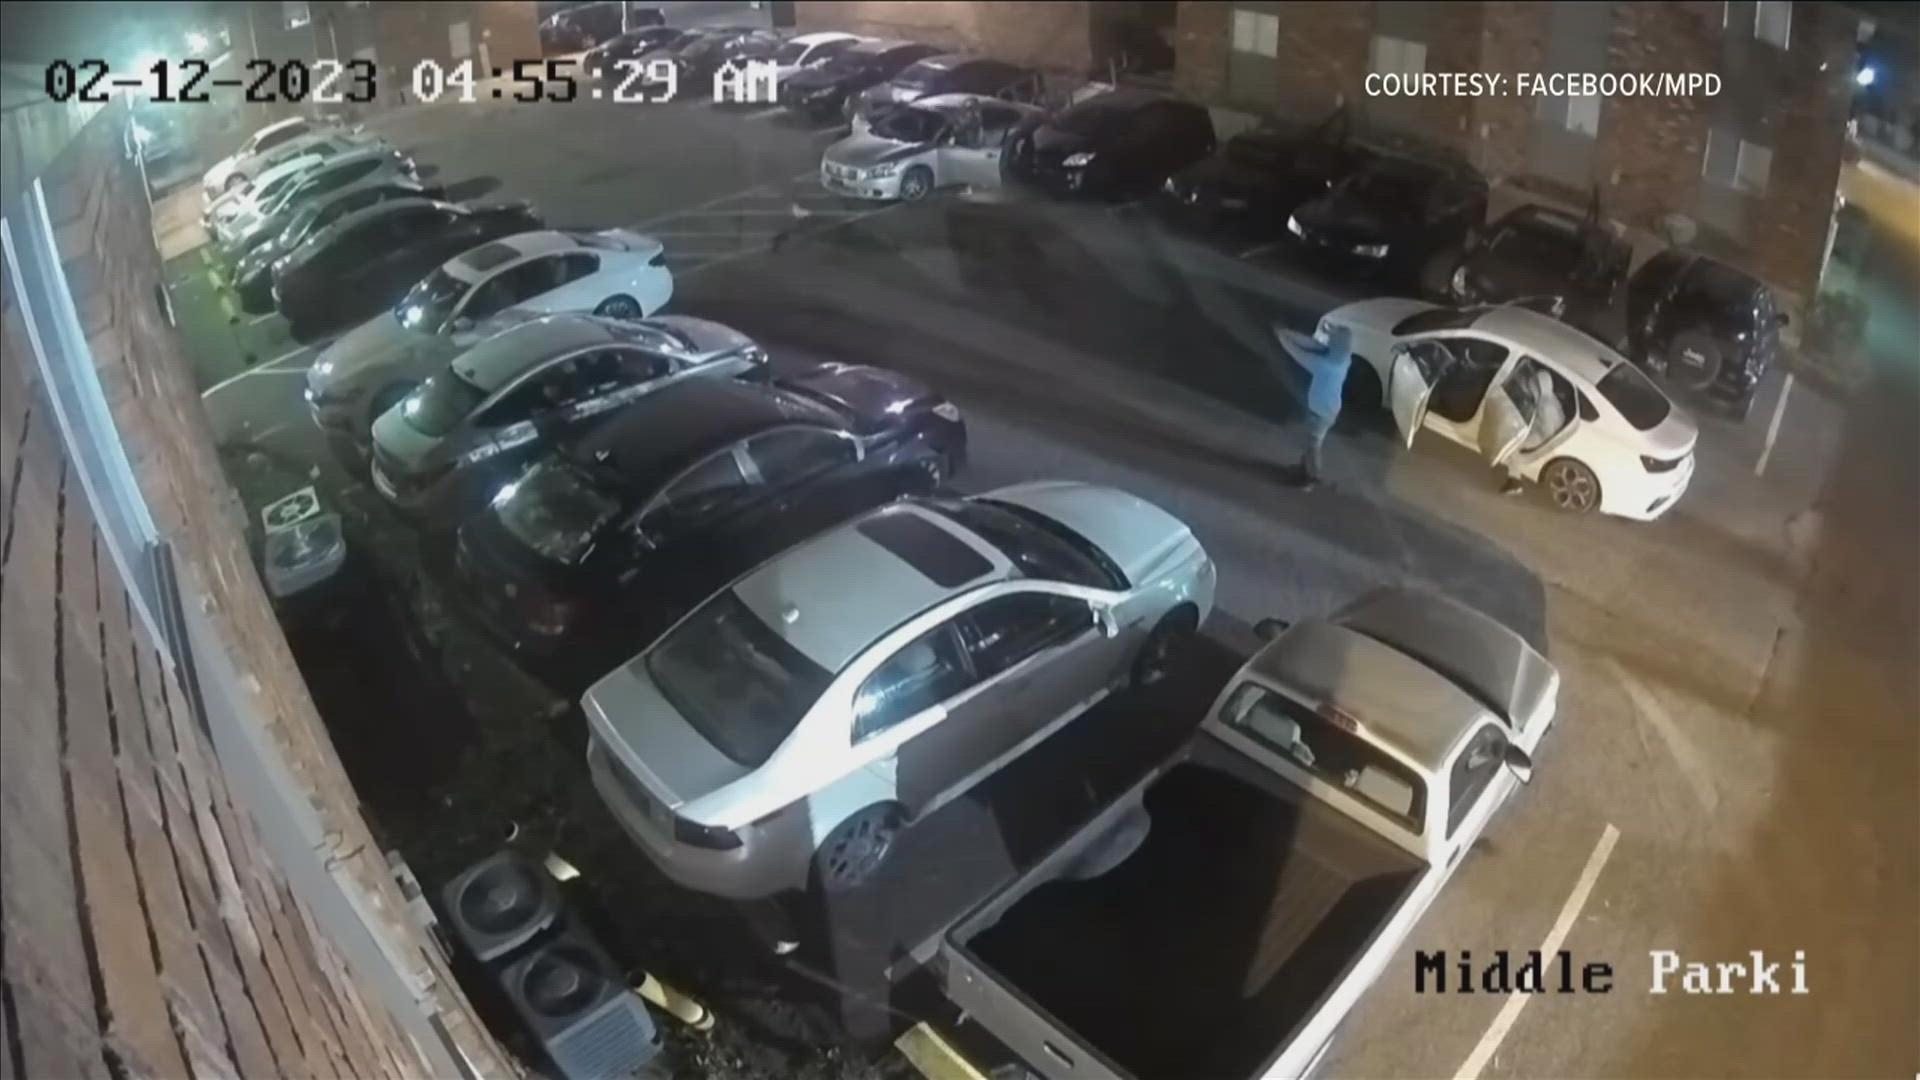 MPD released video of the shooting which happened just before 5 a.m. on Sunday, Feb. 12, 2023, at an apartment complex in the 3200 block of Southern Avenue.